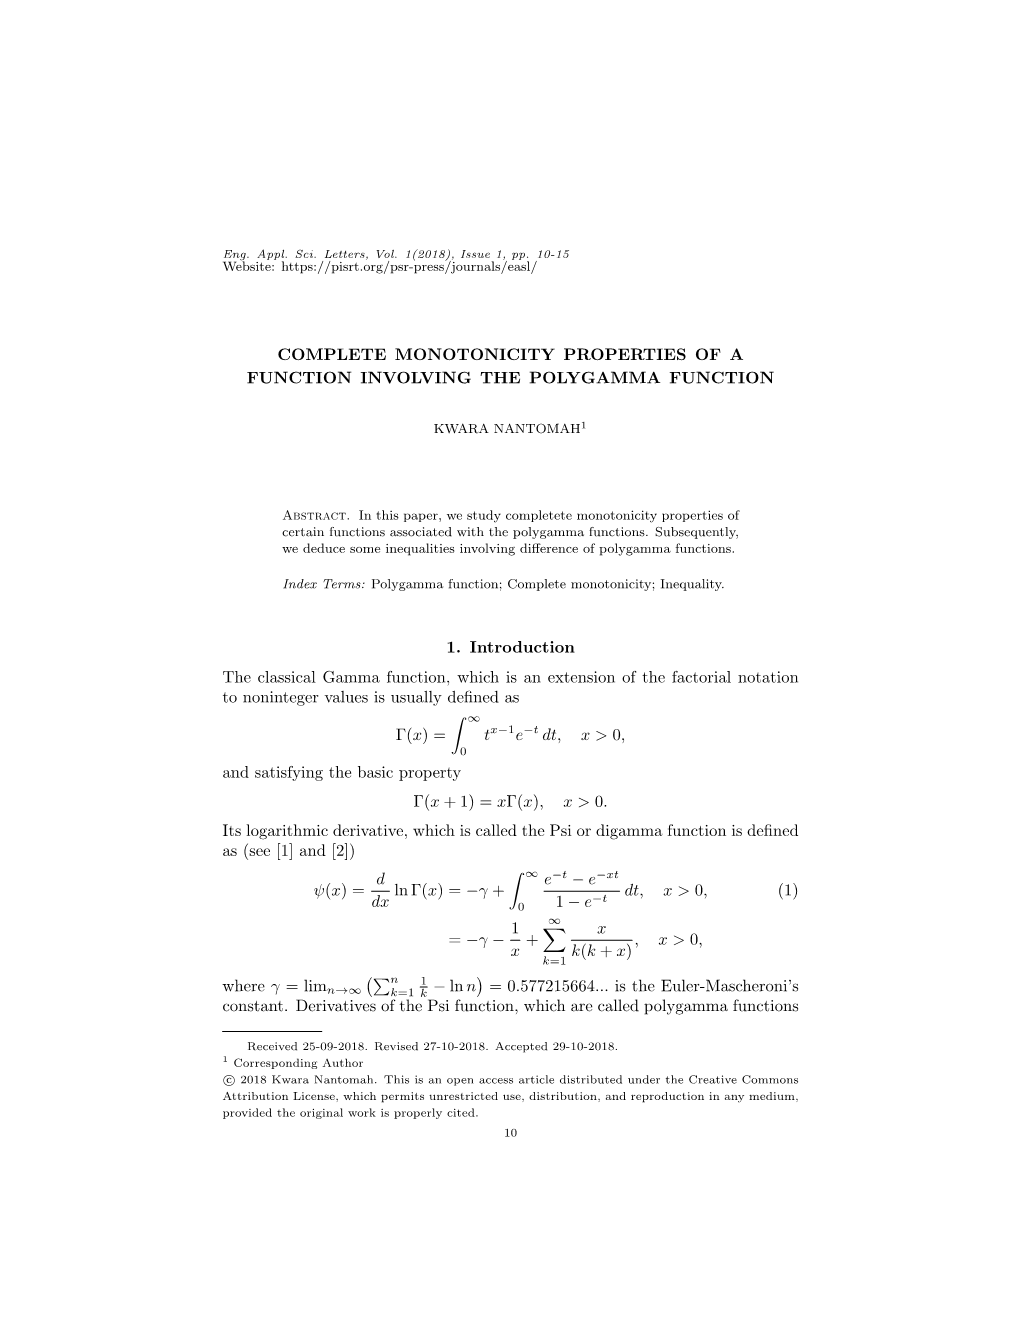 Complete Monotonicity Properties of a Function Involving the Polygamma Function